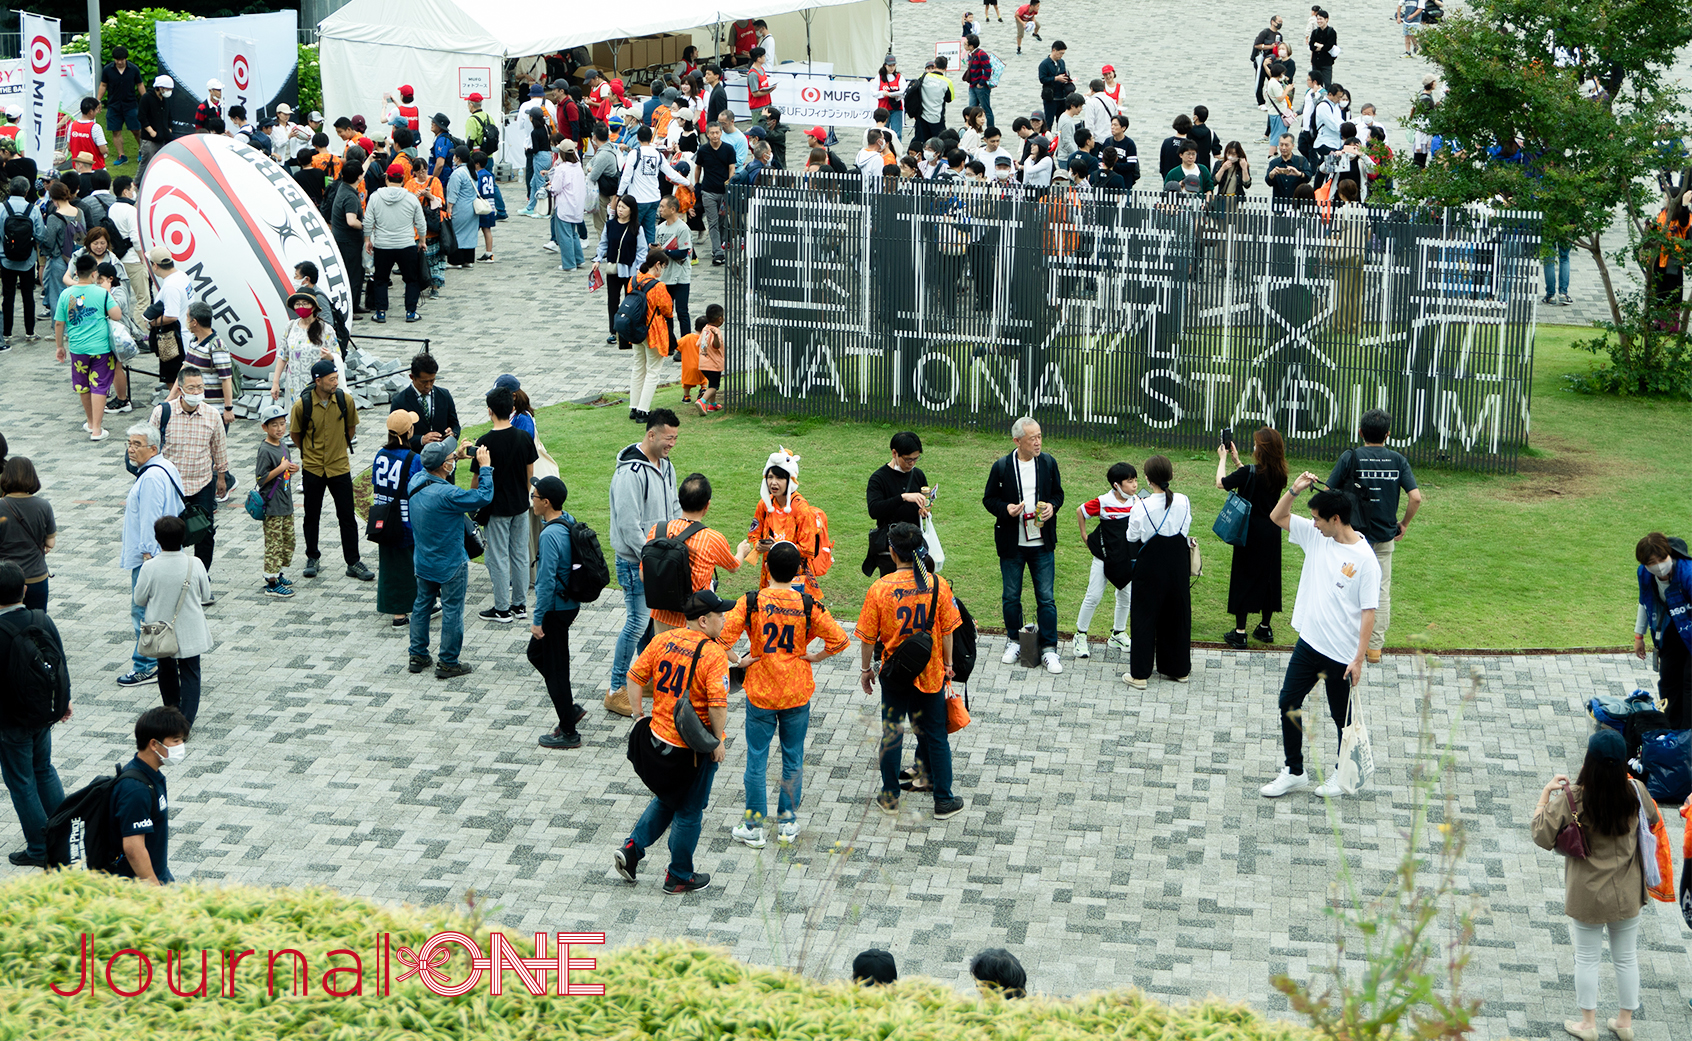 Many rugby fans packed the National Stadium.; Photo by Journal-ONE